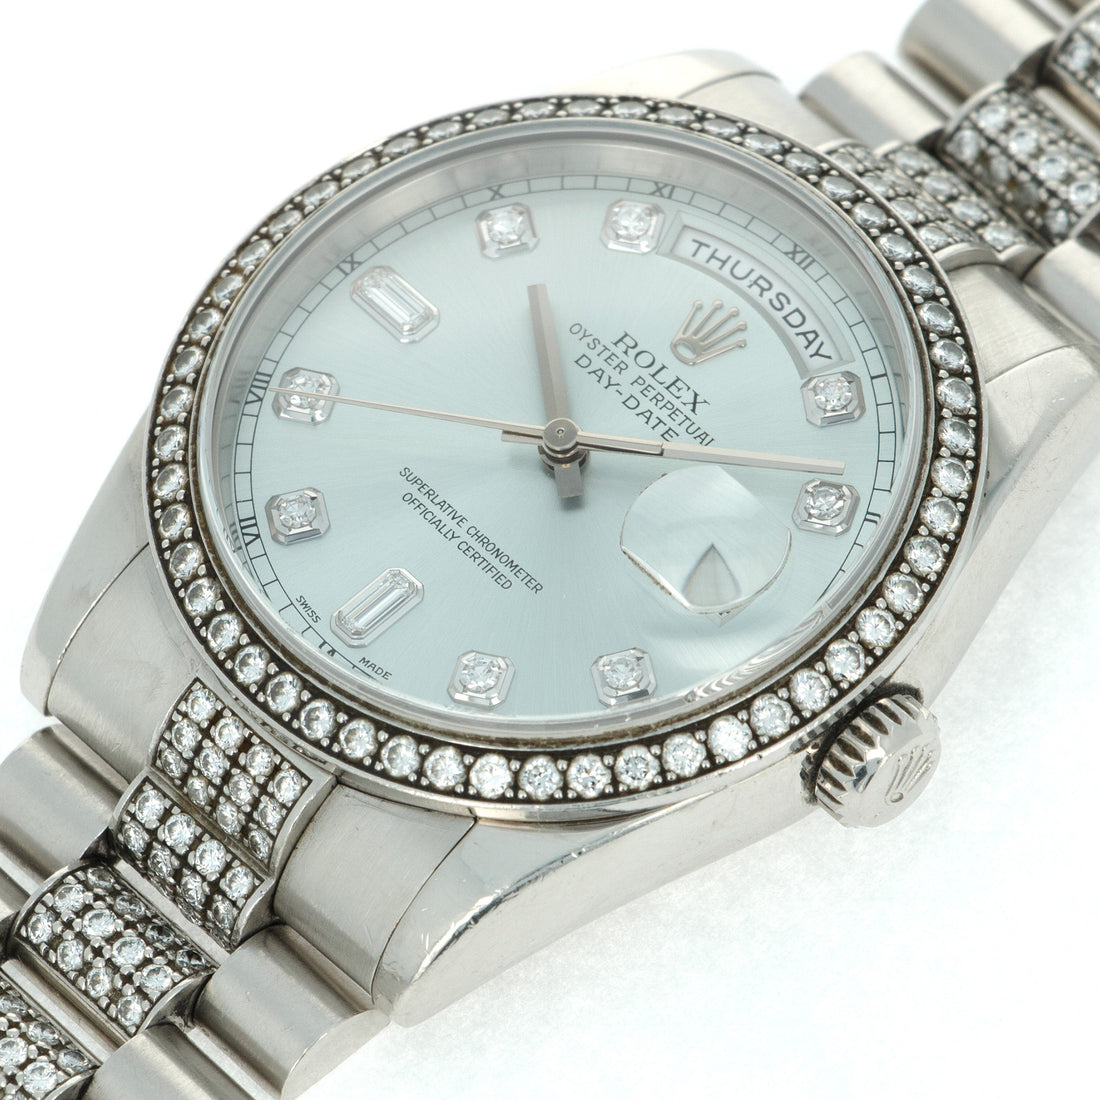 Rolex Day-Date 118346 Platinum  Excellent Condition with Very Minor Wear Unisex Platinum Light Blue with Diamond Markers 36 mm Automatic 2000 Platinum Handmade Travel Pouch 